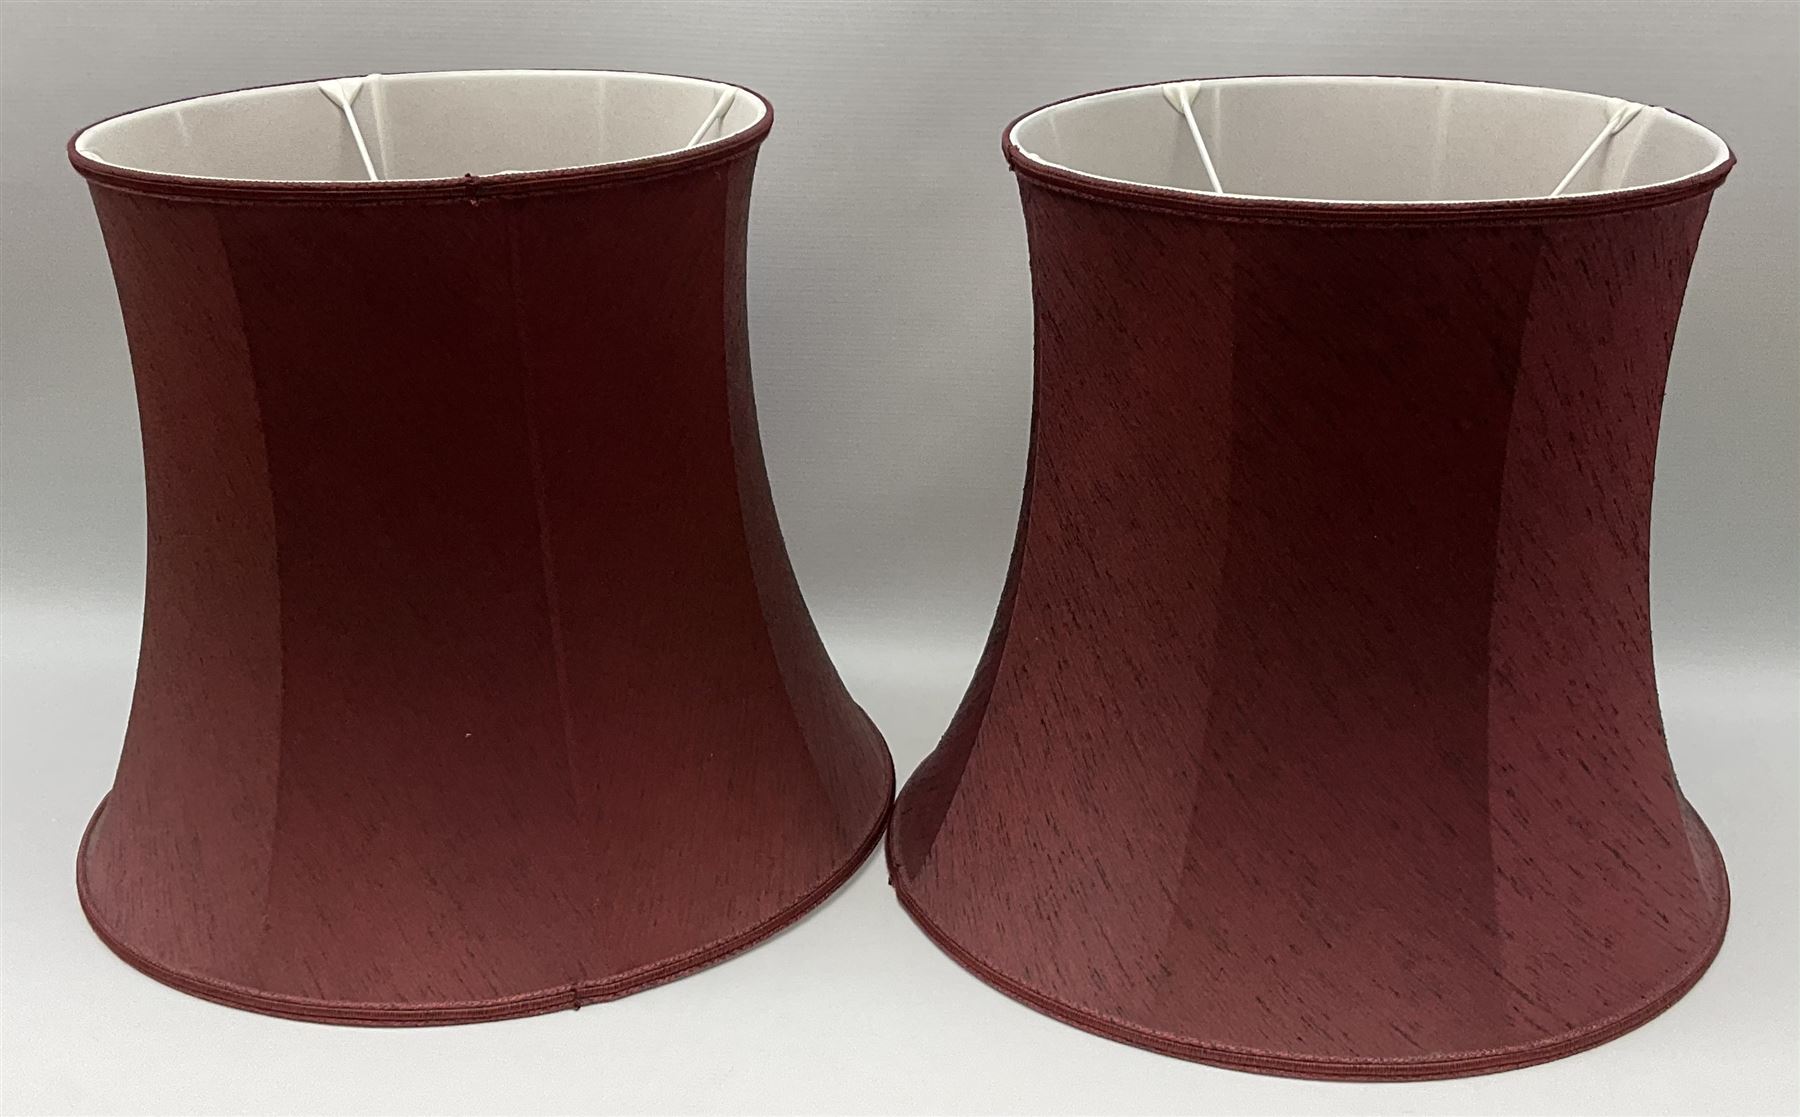 Pair of dark red table lamps in baluster form with a round wooden base - Image 6 of 6